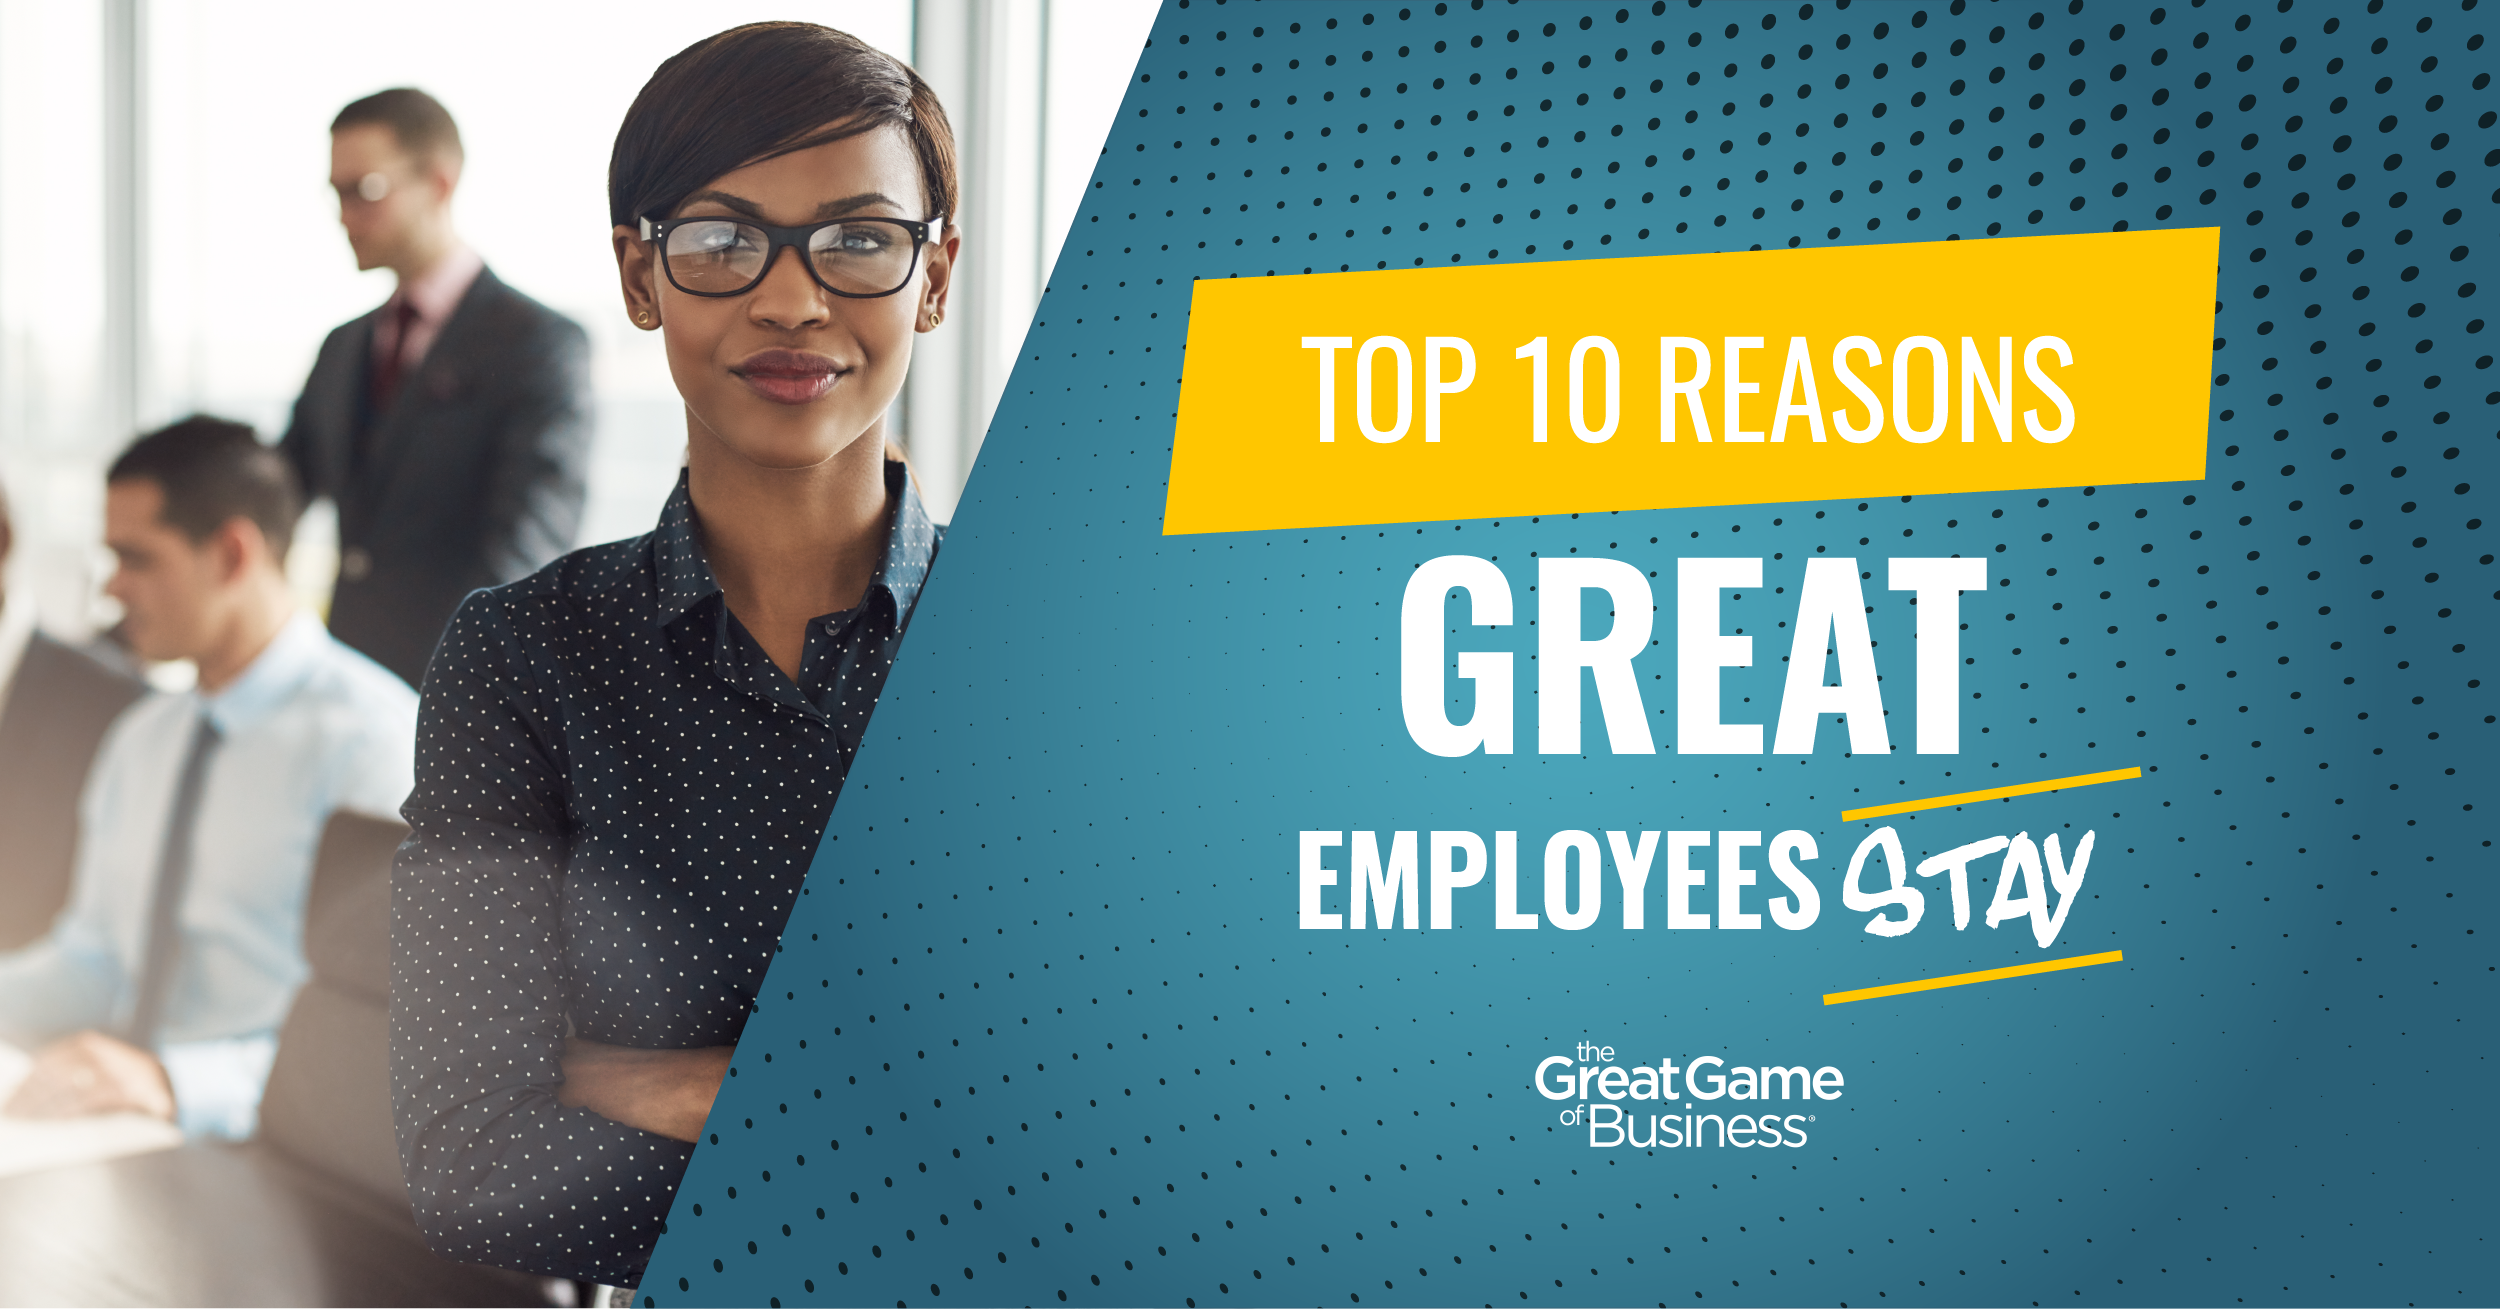 Top 10 Reasons Great Employees Stay